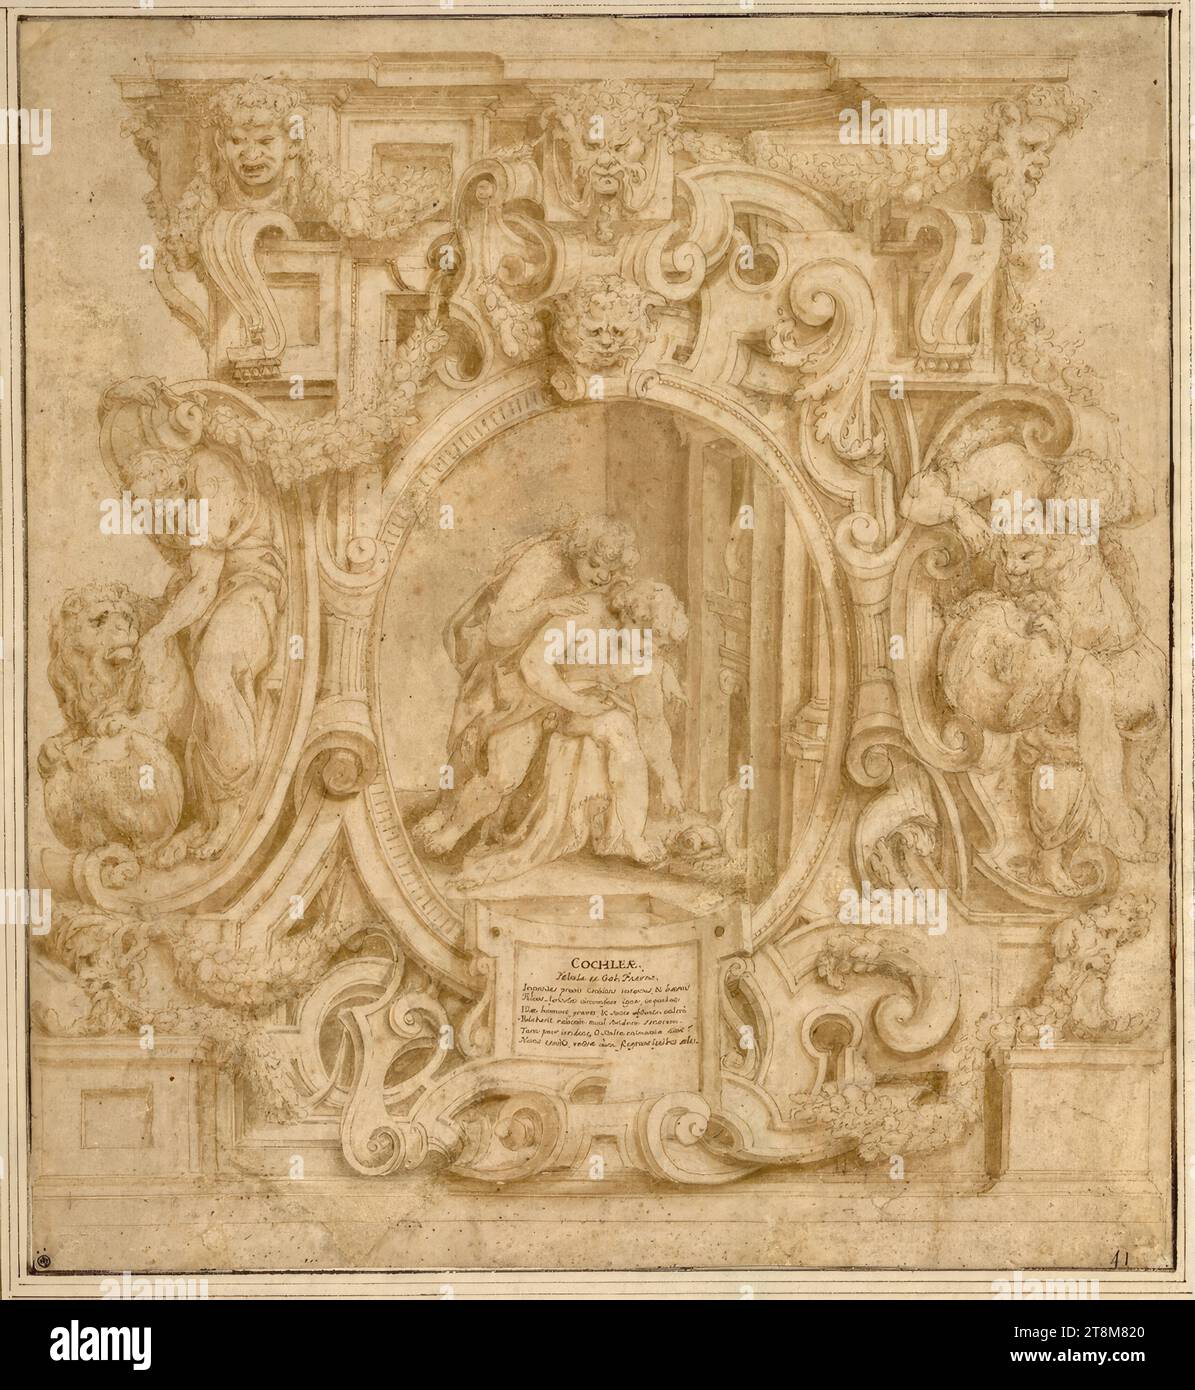 Die Fabel von der singenden Muschel, Lelio Orsi da Novellara (Novellara 1508/11 - 1587 Reggio nell'Emilia), um 1563/64, Zeichnung, Feder, laviert, 30.8 x 28.1 cm, l.u. Mariette; l.u. Fries; r.u. Herzog Albert von Sachsen-Teschen, 'COCHLEAE, Fable from Gab. Faerno II placed plum snails intently sticking to the god, The son of the farmer was cooking around the fire, They were heavy with humor and juice despite the heat, They ate a hoarse sound with a thin shrill., Then the child laughing, O foolish animal, said:, Now you dogs Stock Photo